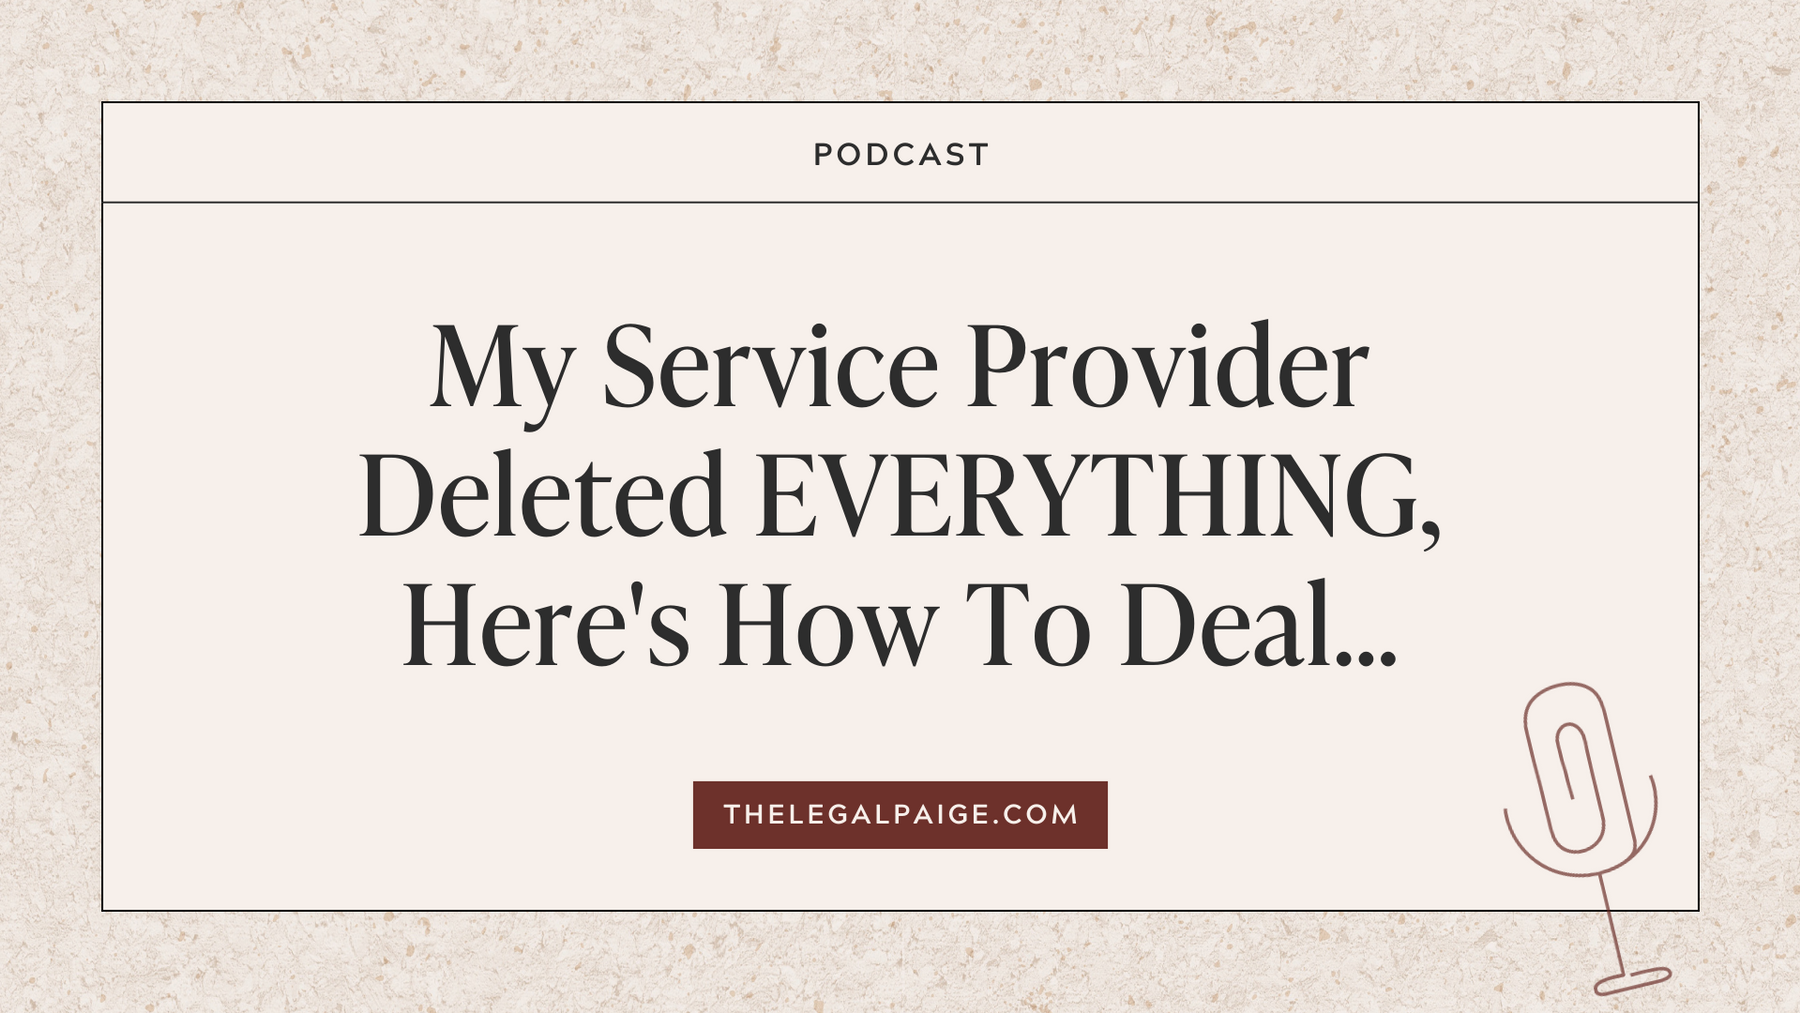 My Service Provider Deleted EVERYTHING, Here's How To Deal...